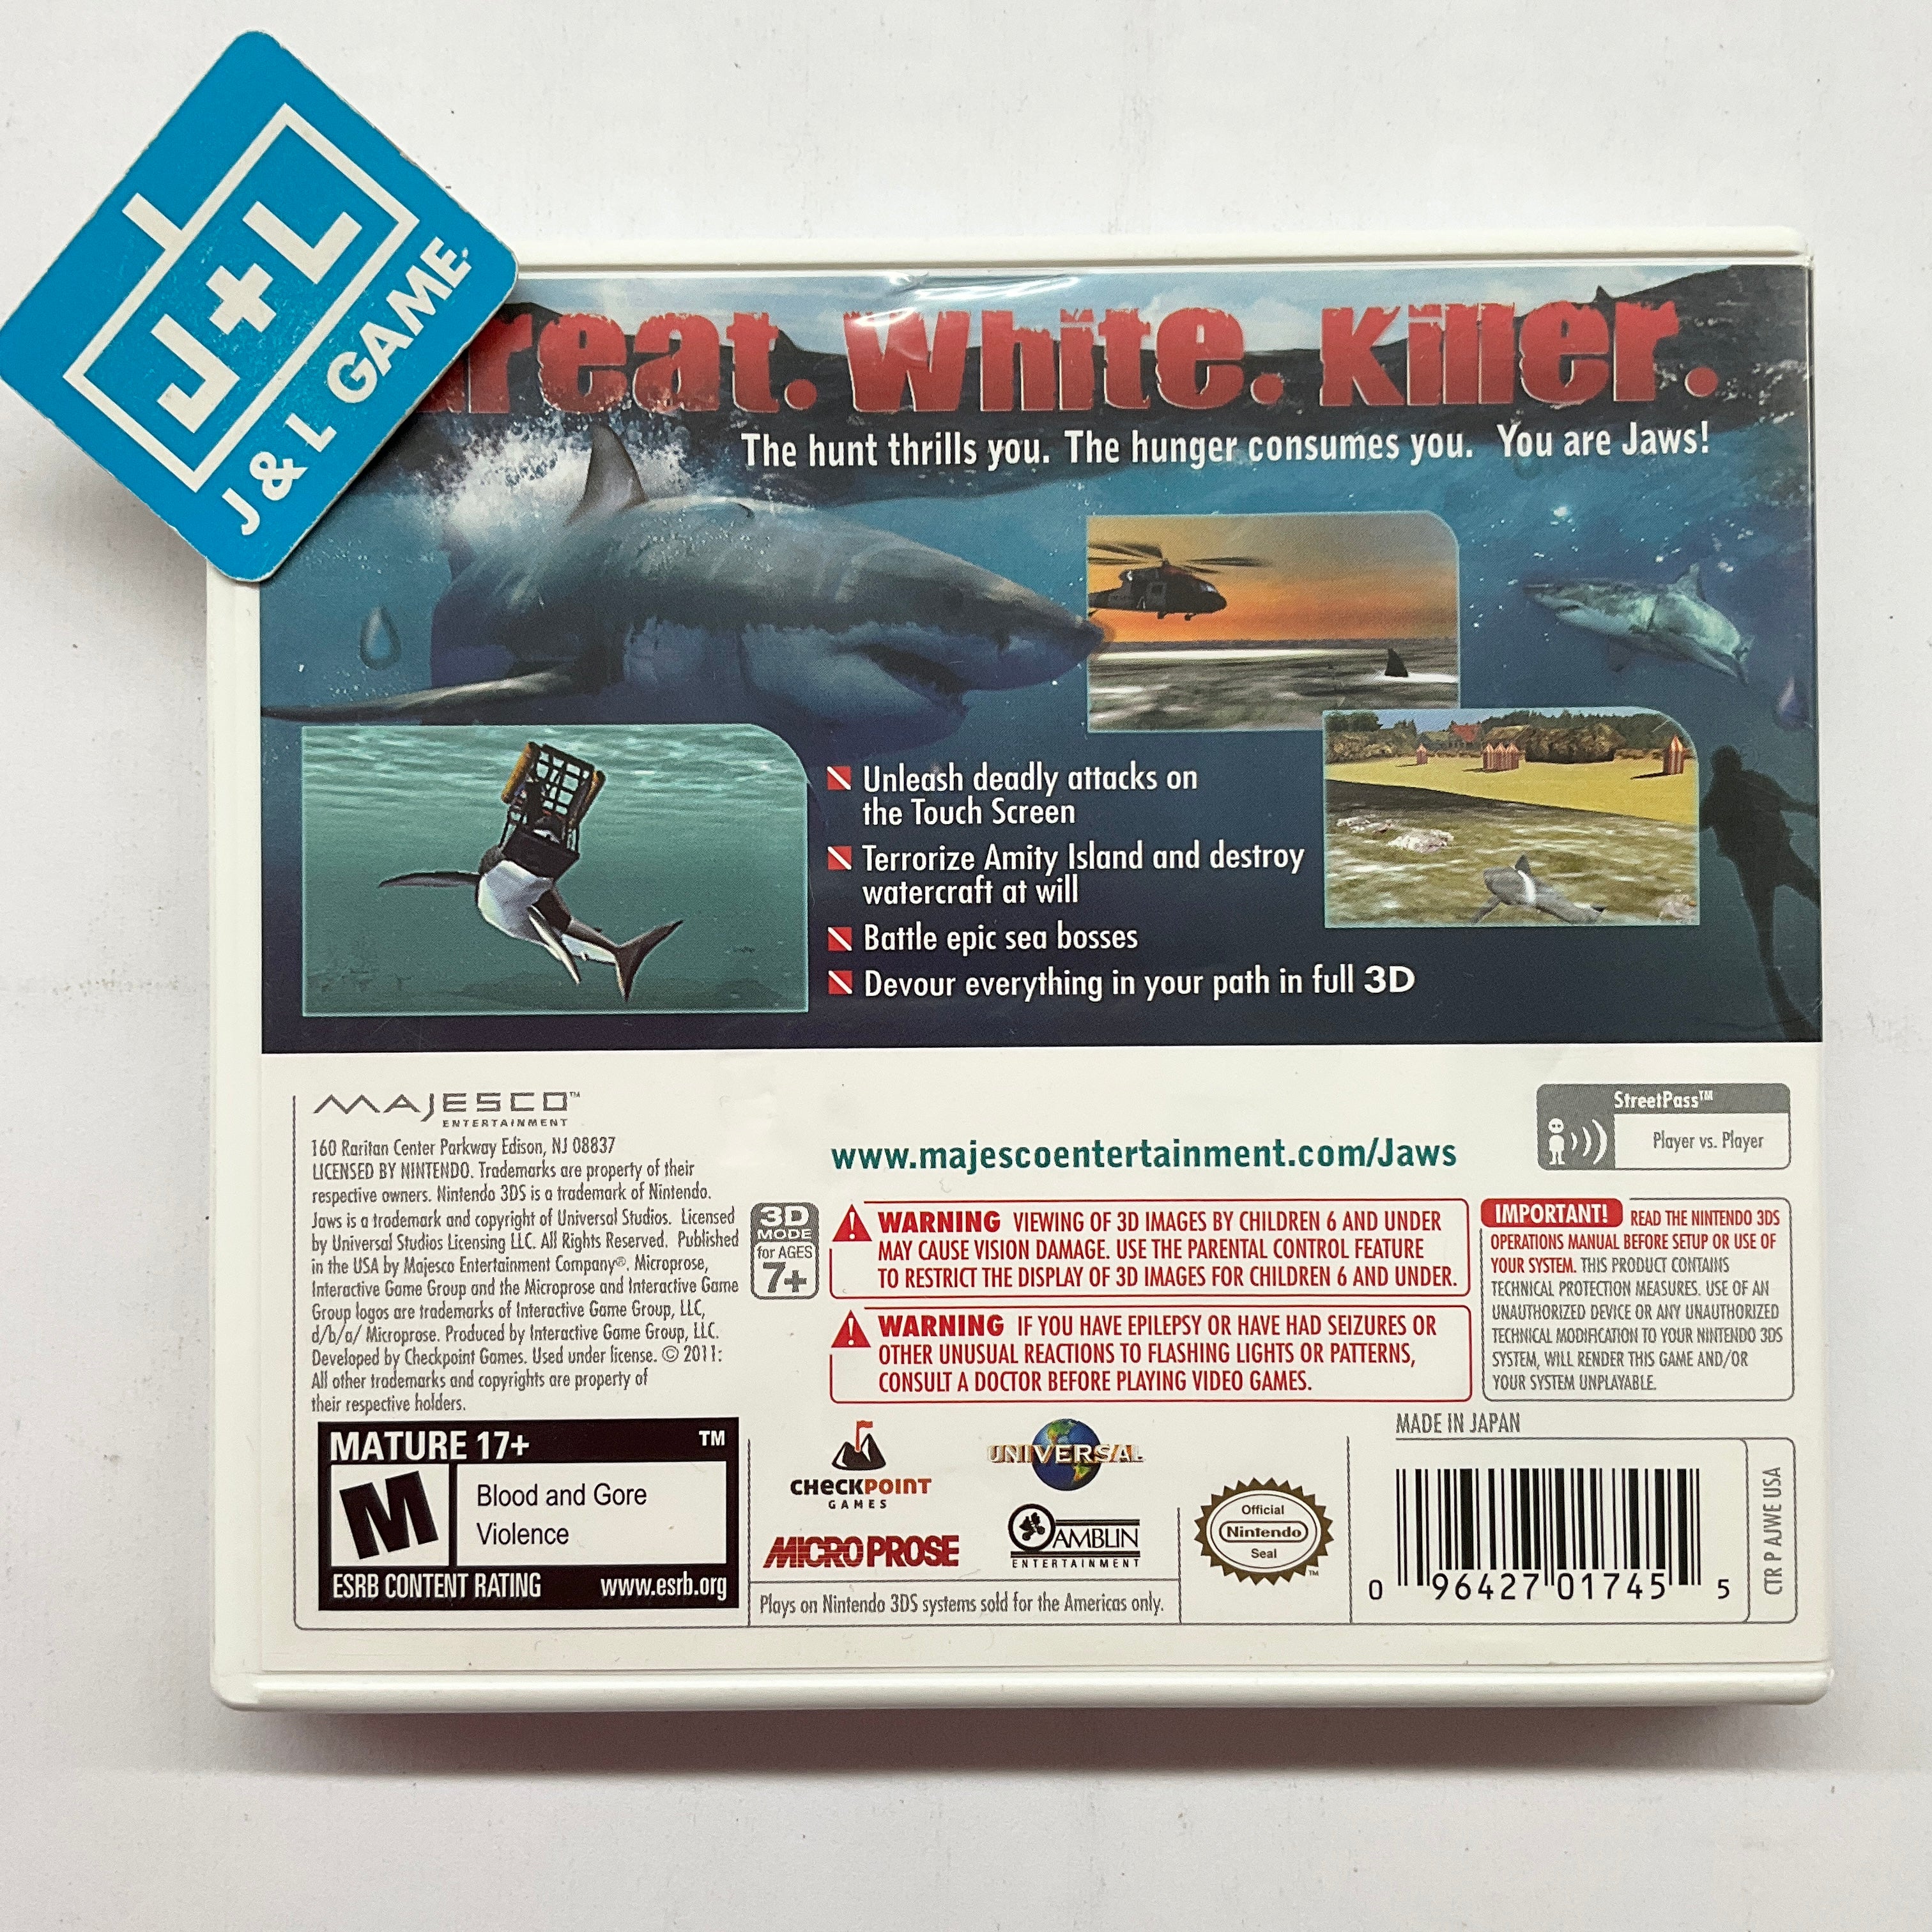 Jaws: Ultimate Predator - Nintendo 3DS [Pre-Owned] Video Games Majesco   